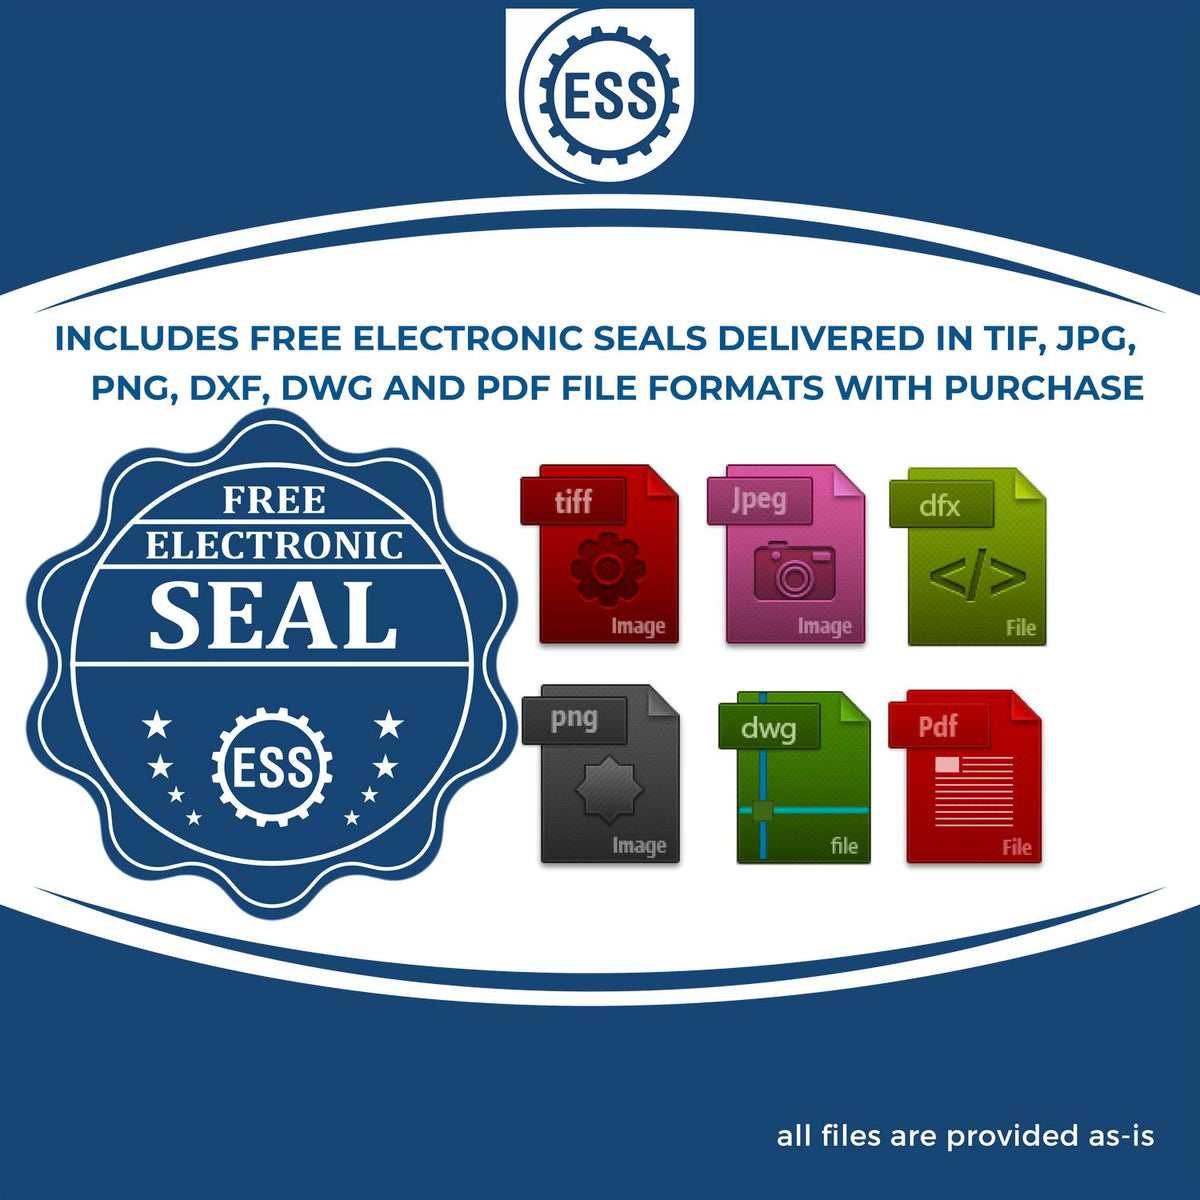 An infographic for the free electronic seal for the Hybrid Vermont Land Surveyor Seal illustrating the different file type icons such as DXF, DWG, TIF, JPG and PNG.